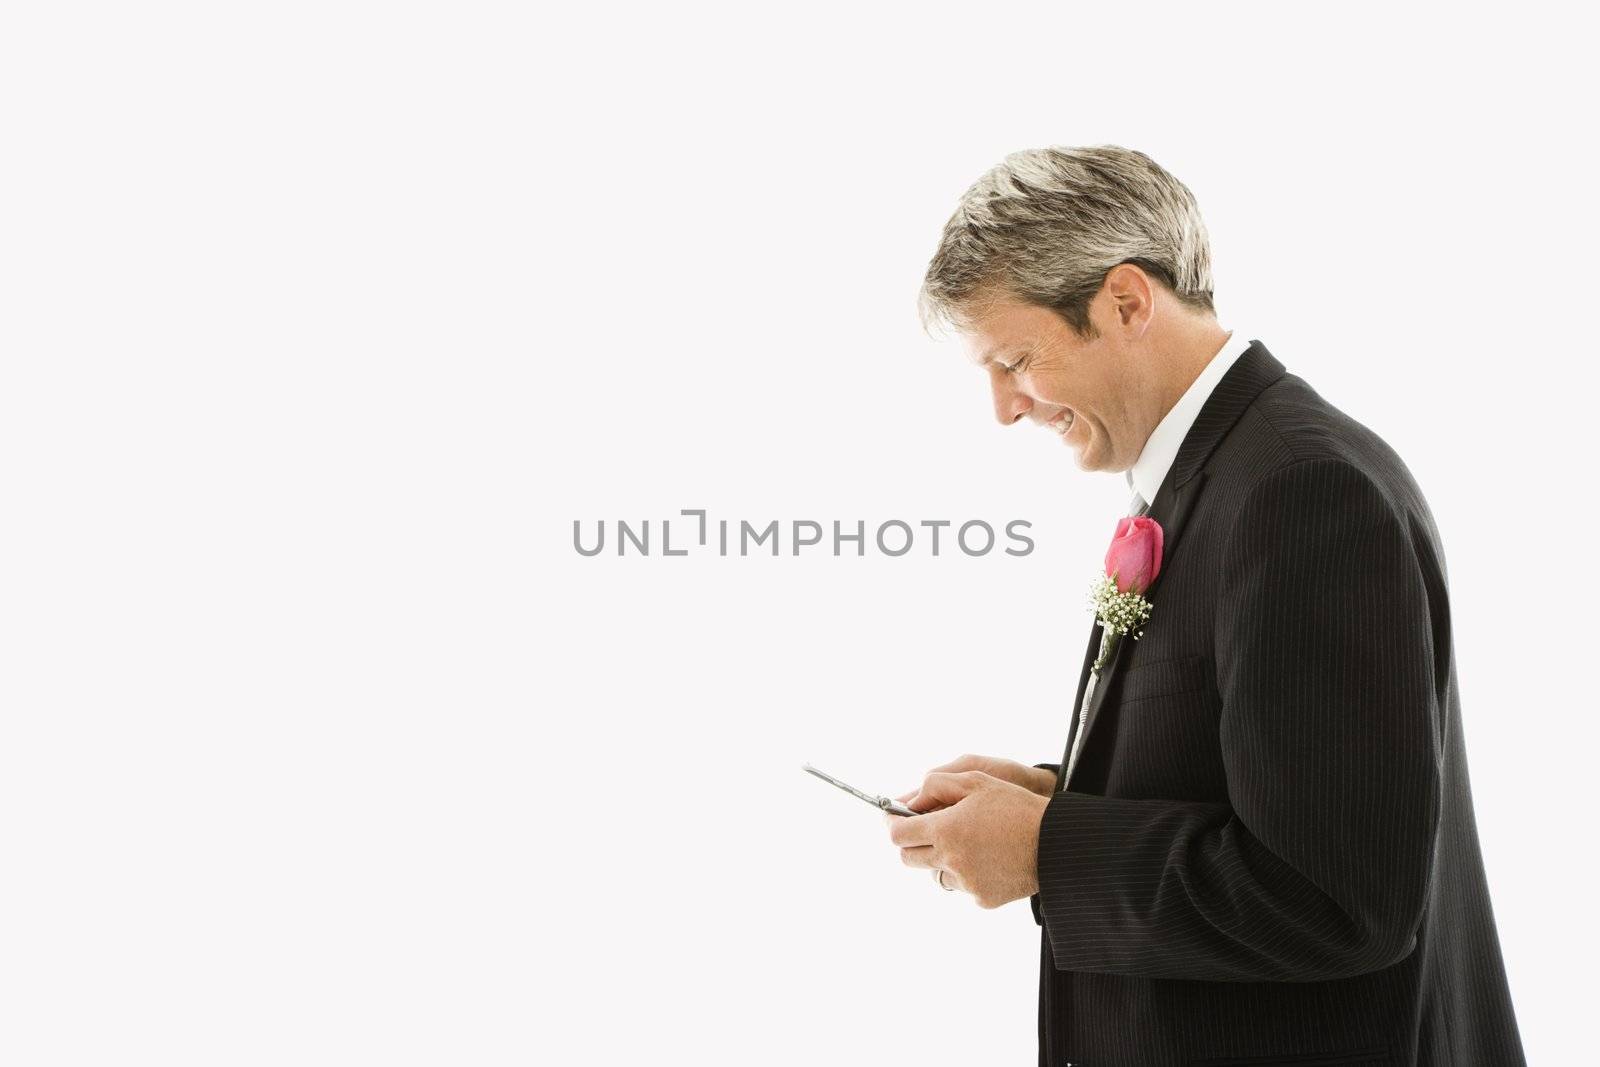 Caucasian groom texting on cellphone.